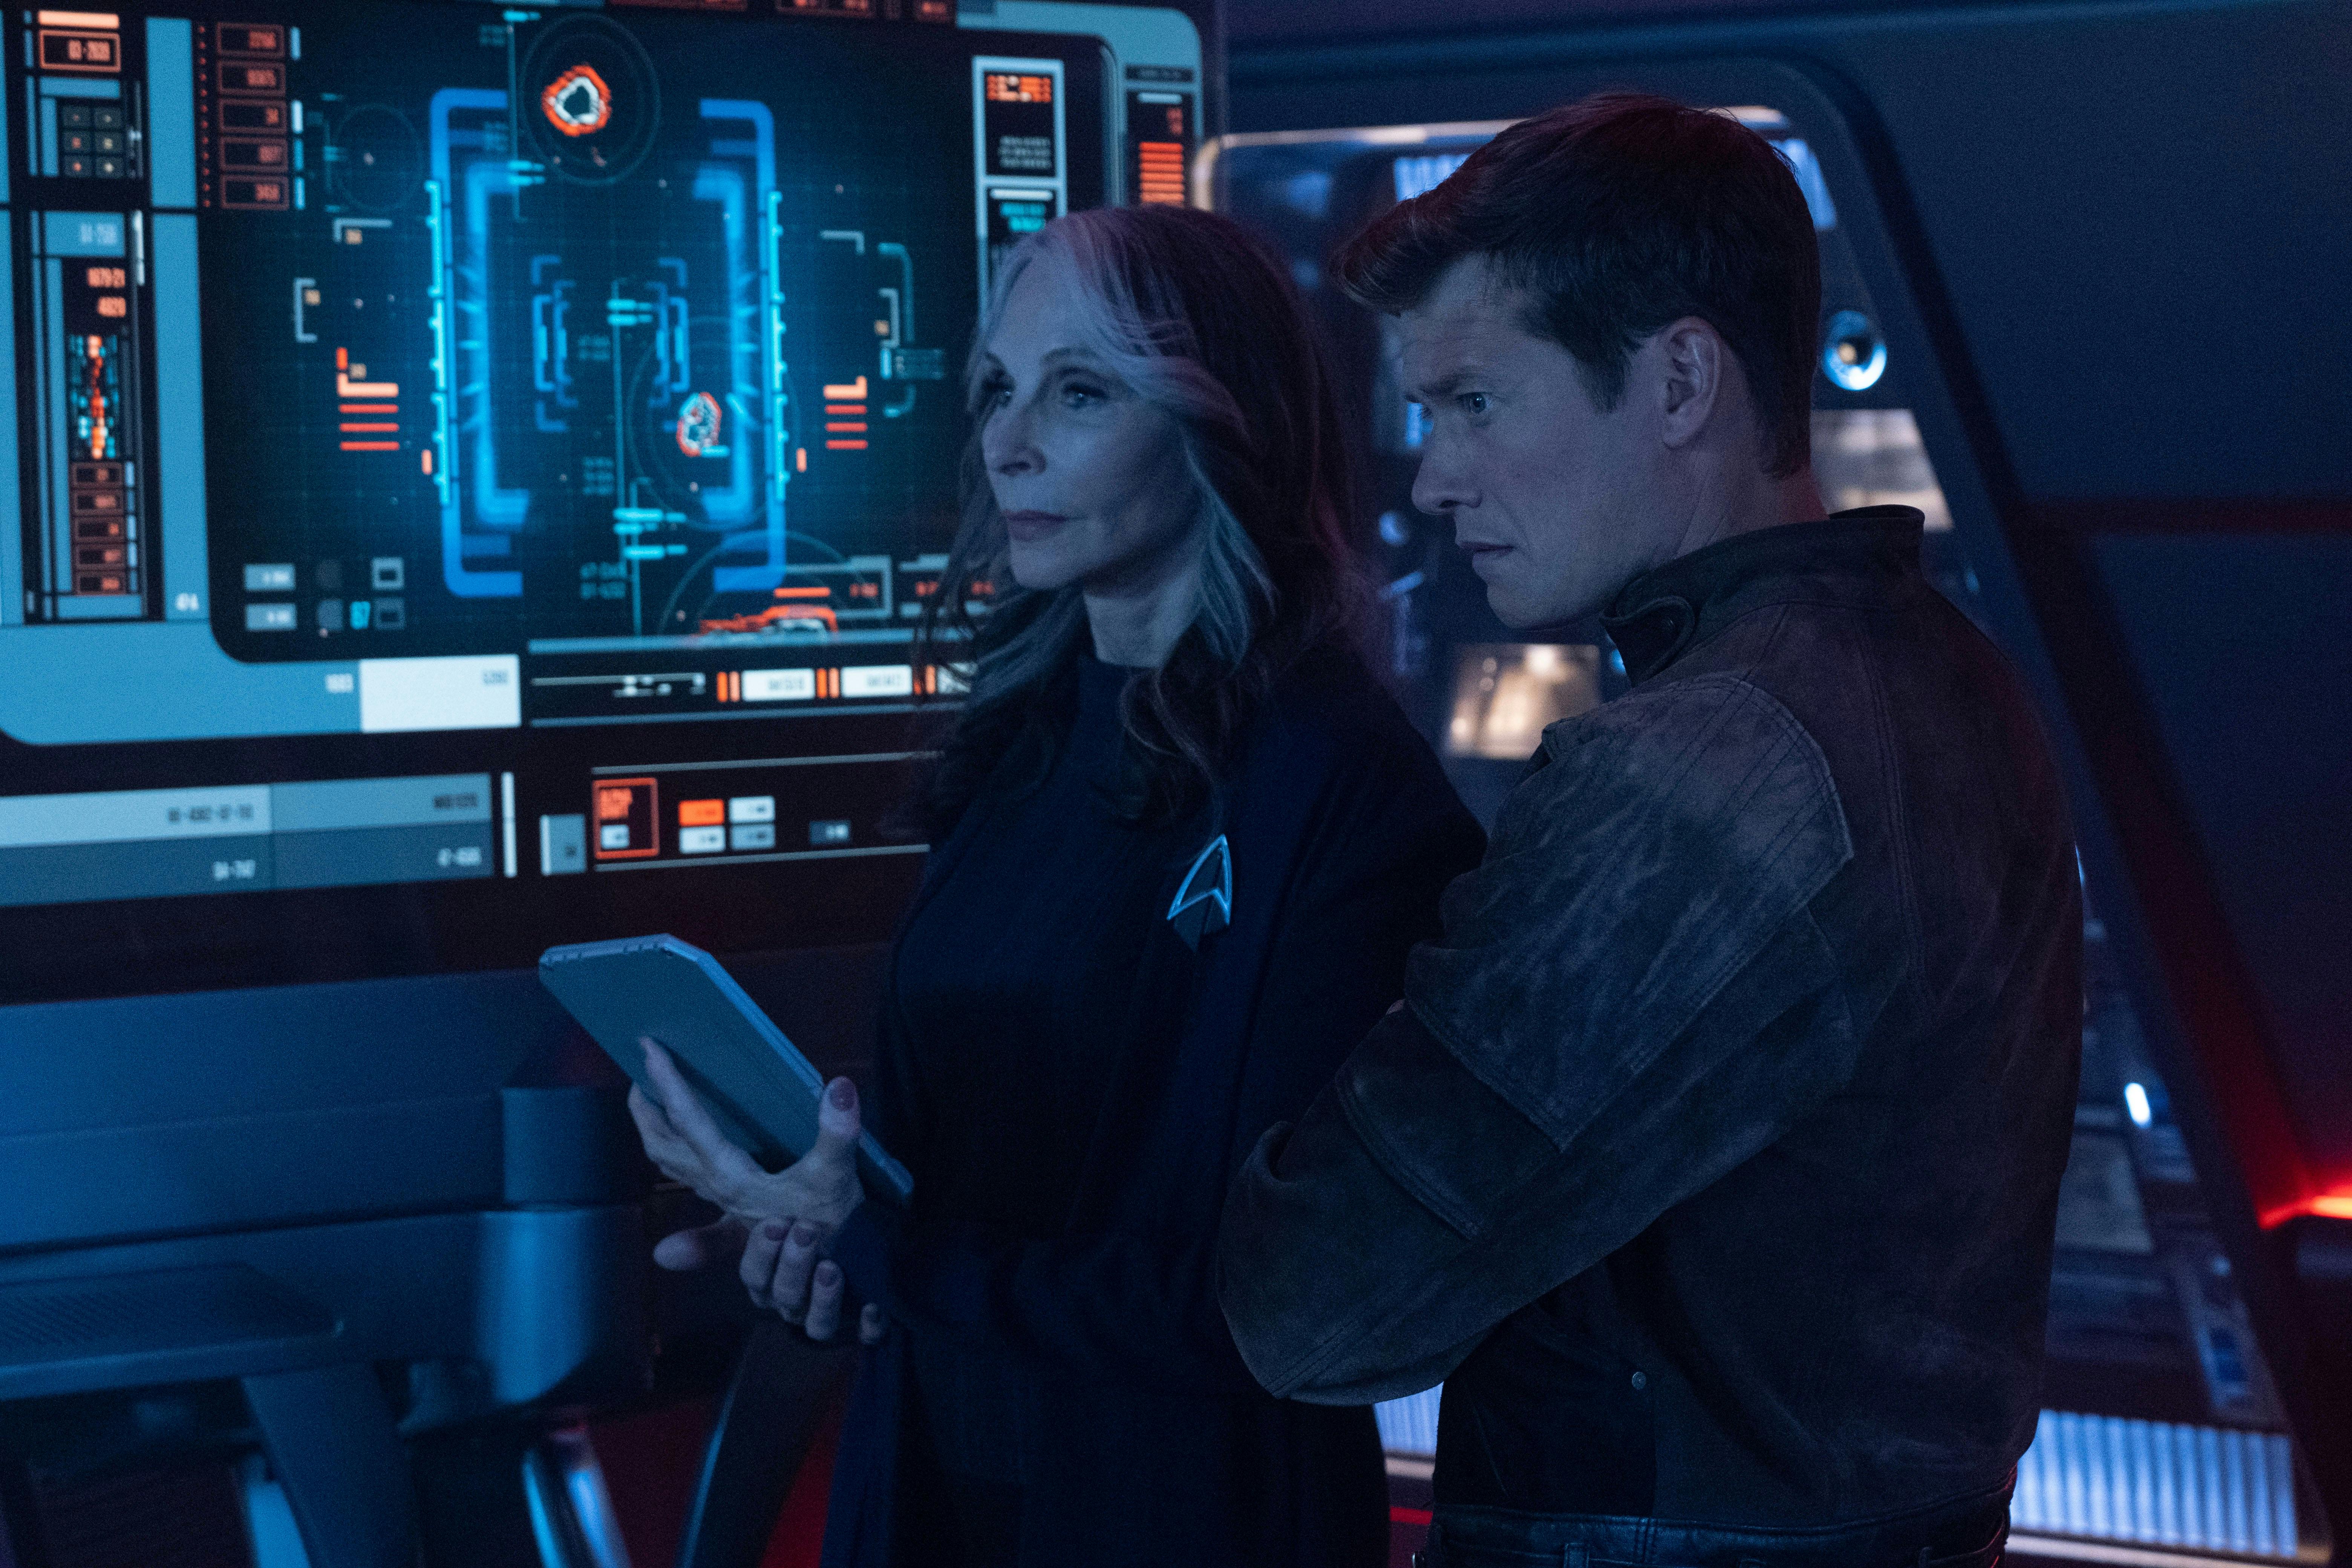 Beverly Crusher and Jack Crusher review data on her padd as well as the monitors ahead of them on the Titan bridge